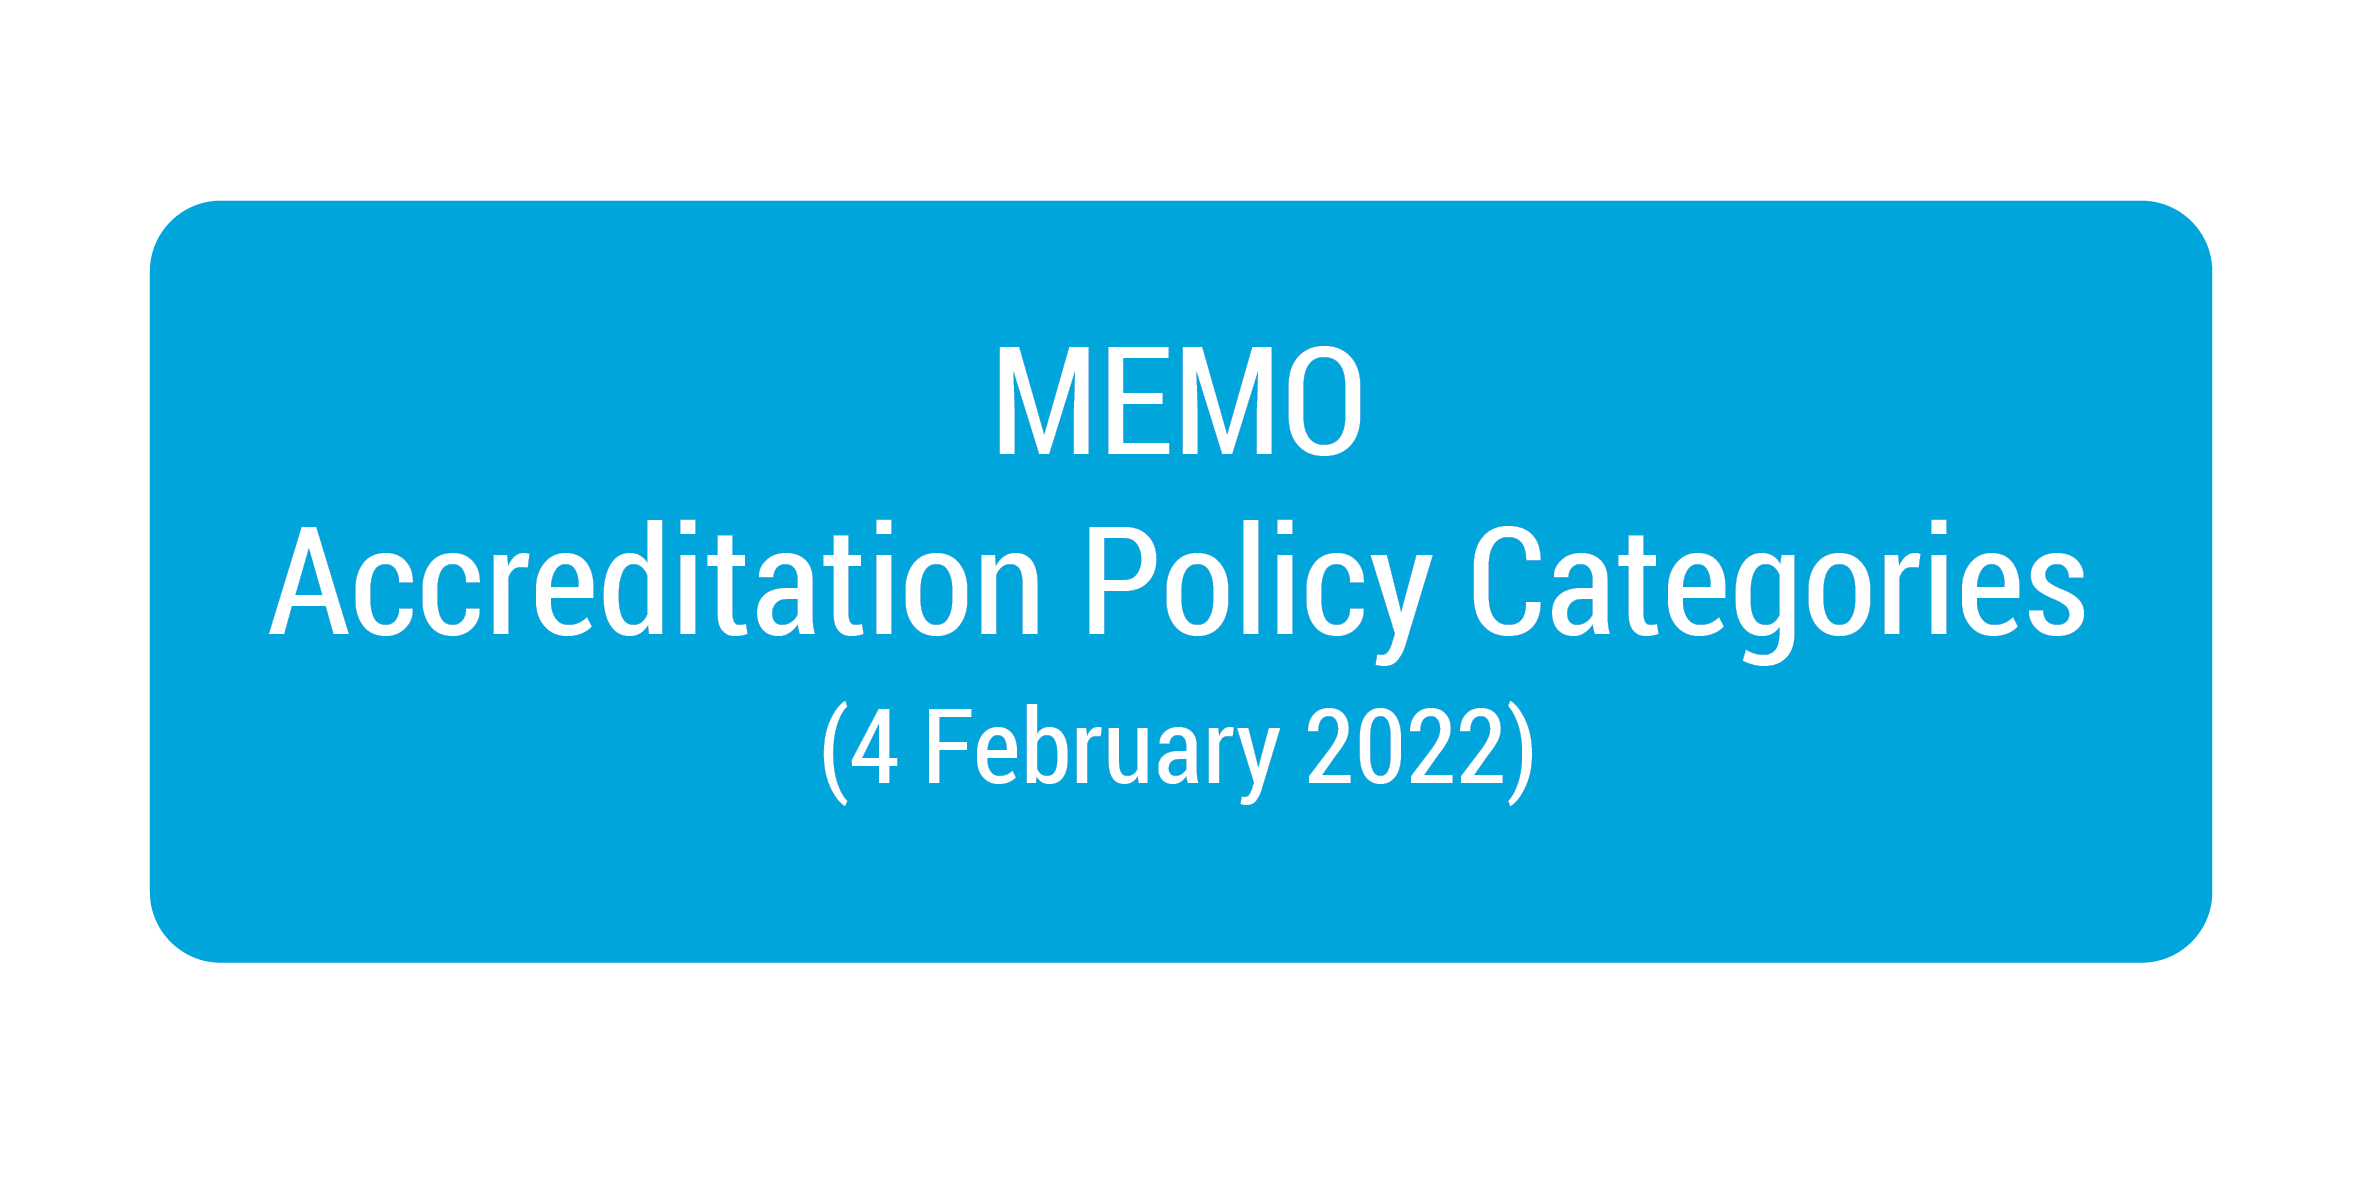 CES Ltd MEMO Accreditation Policy Categories 040222